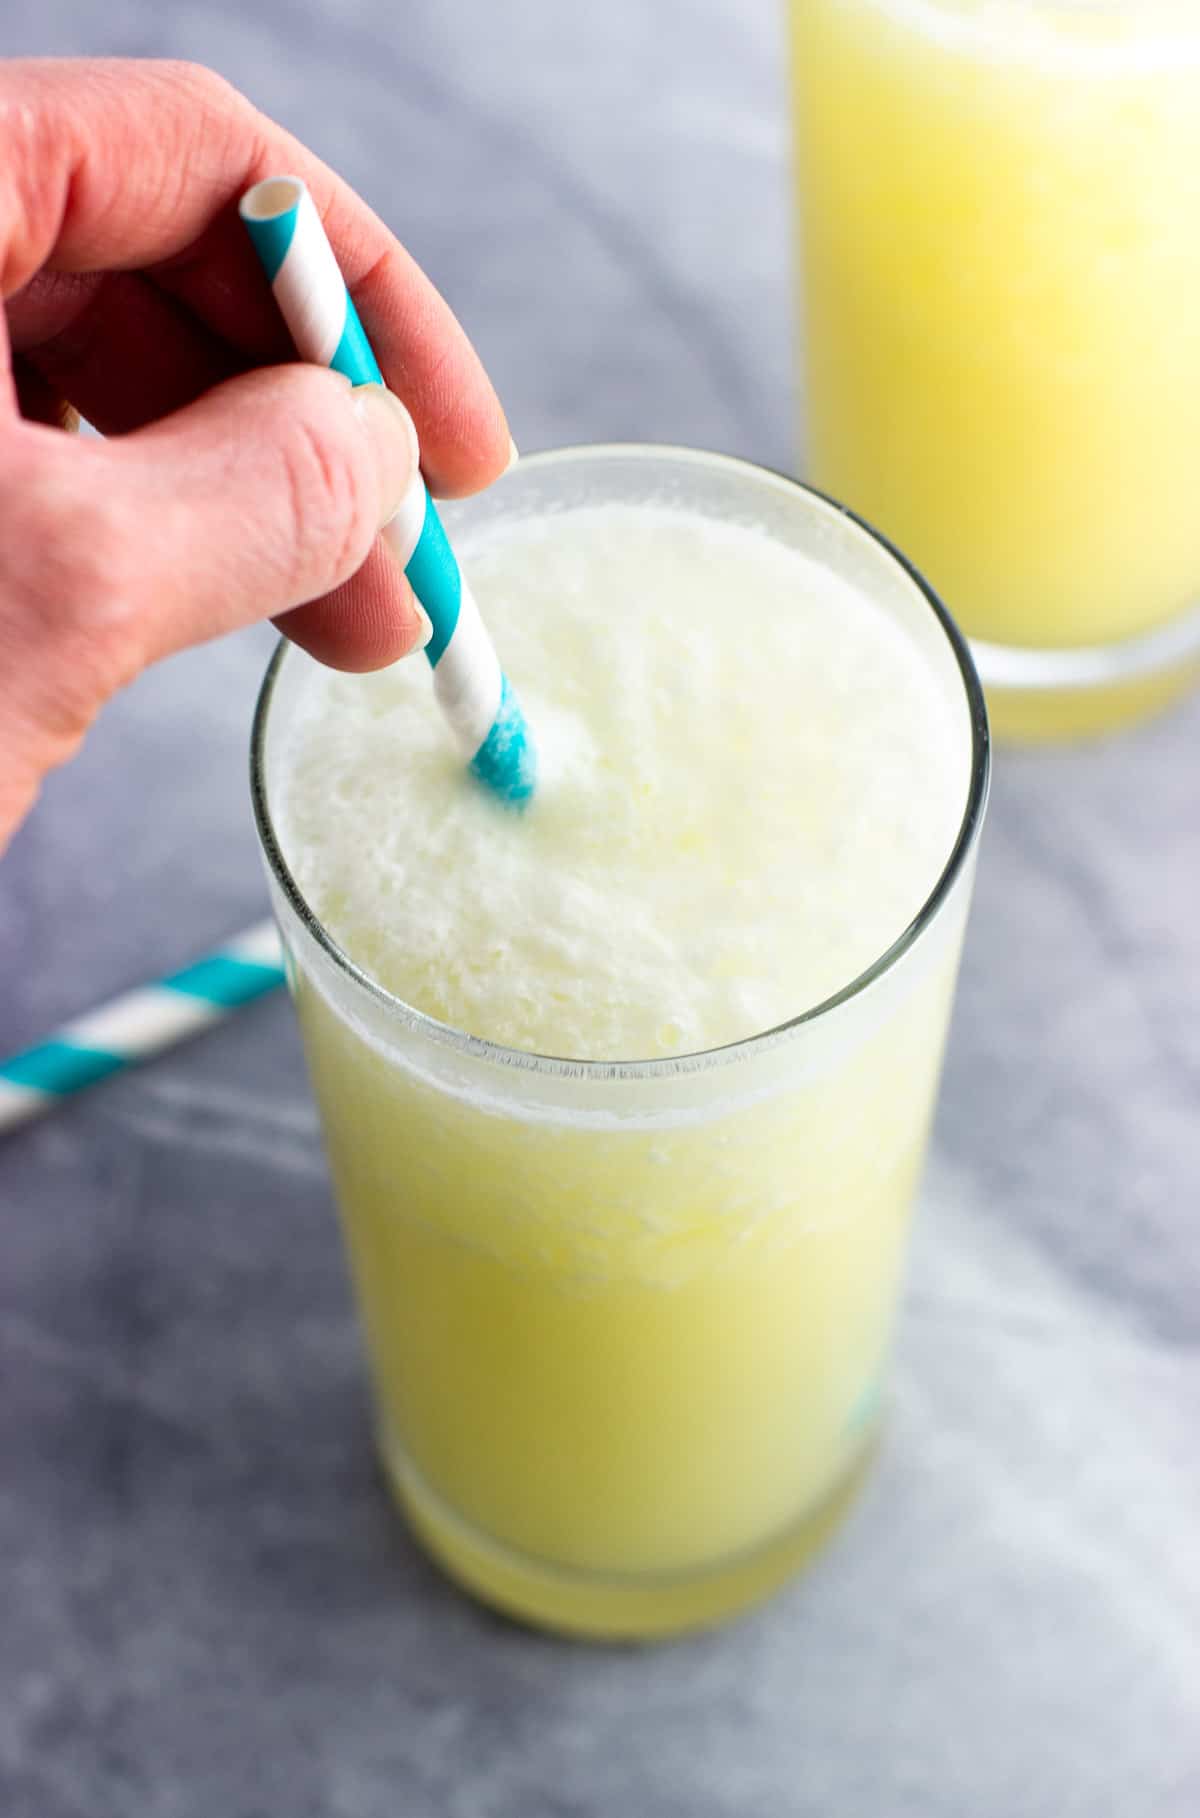 Stirring sparkling water into a virgin pina colada with a straw.